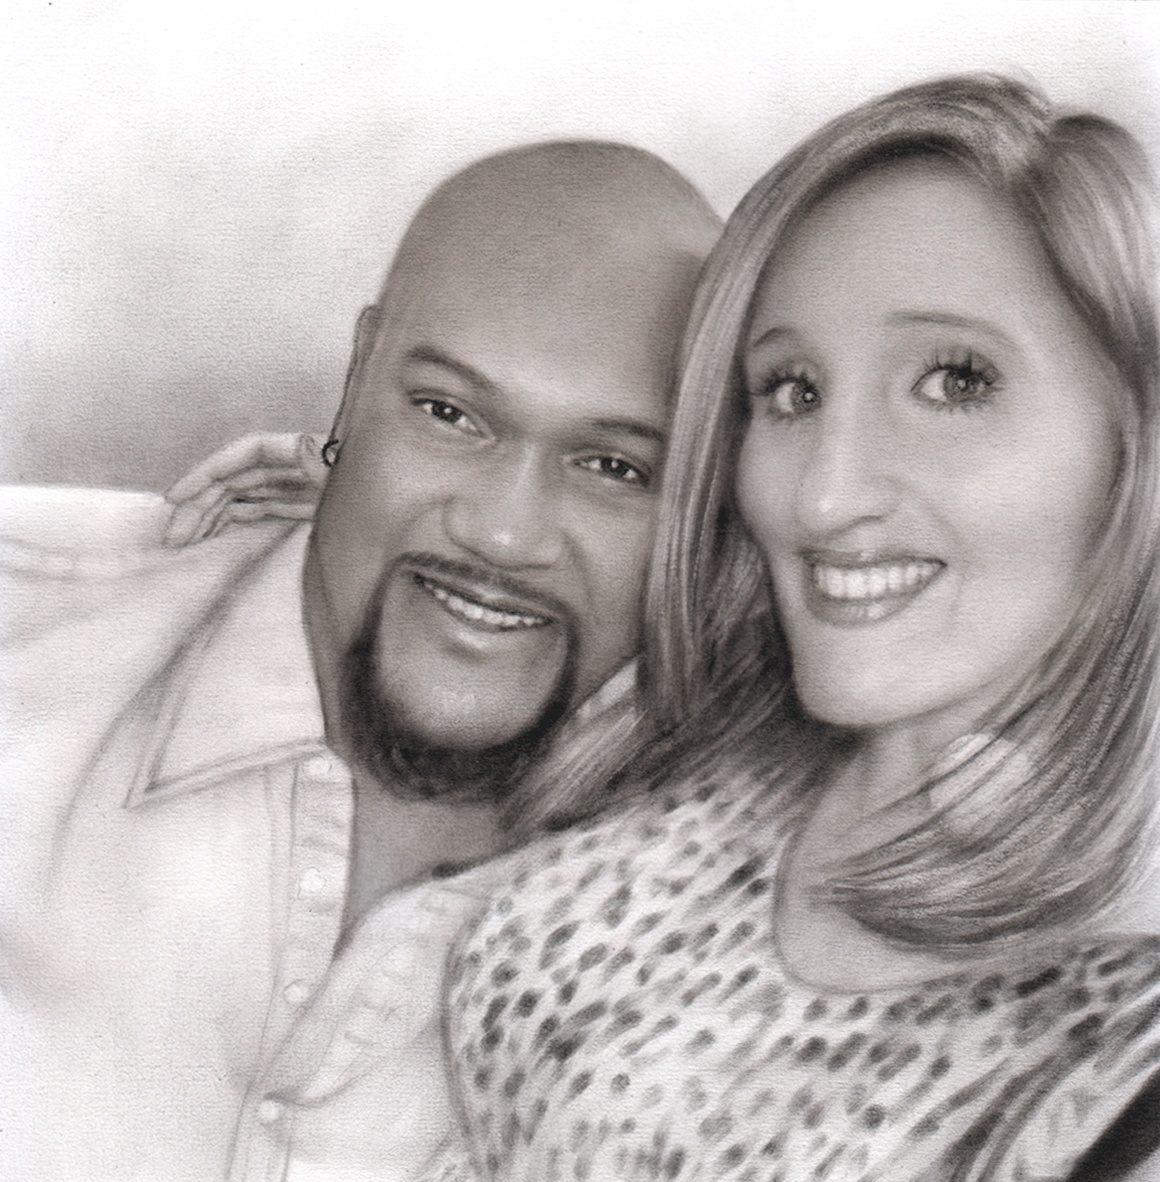 A black and white charcoal drawing of a man and woman, perfect for an anniversary gift.